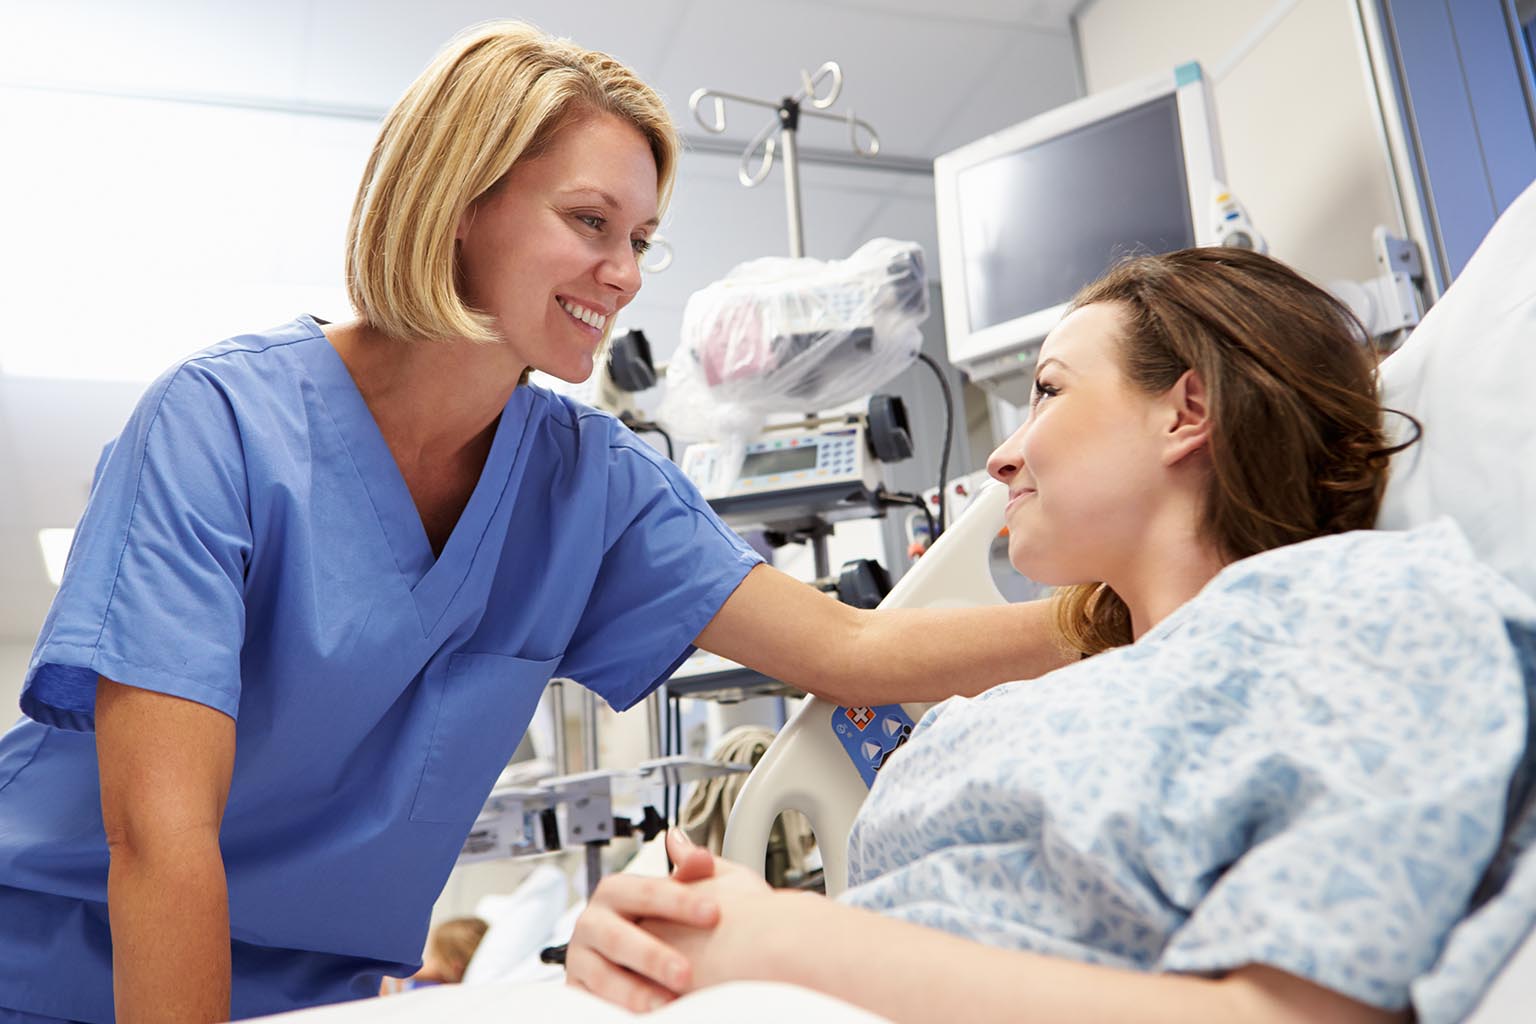 The new rules for recruiting and retaining nurses